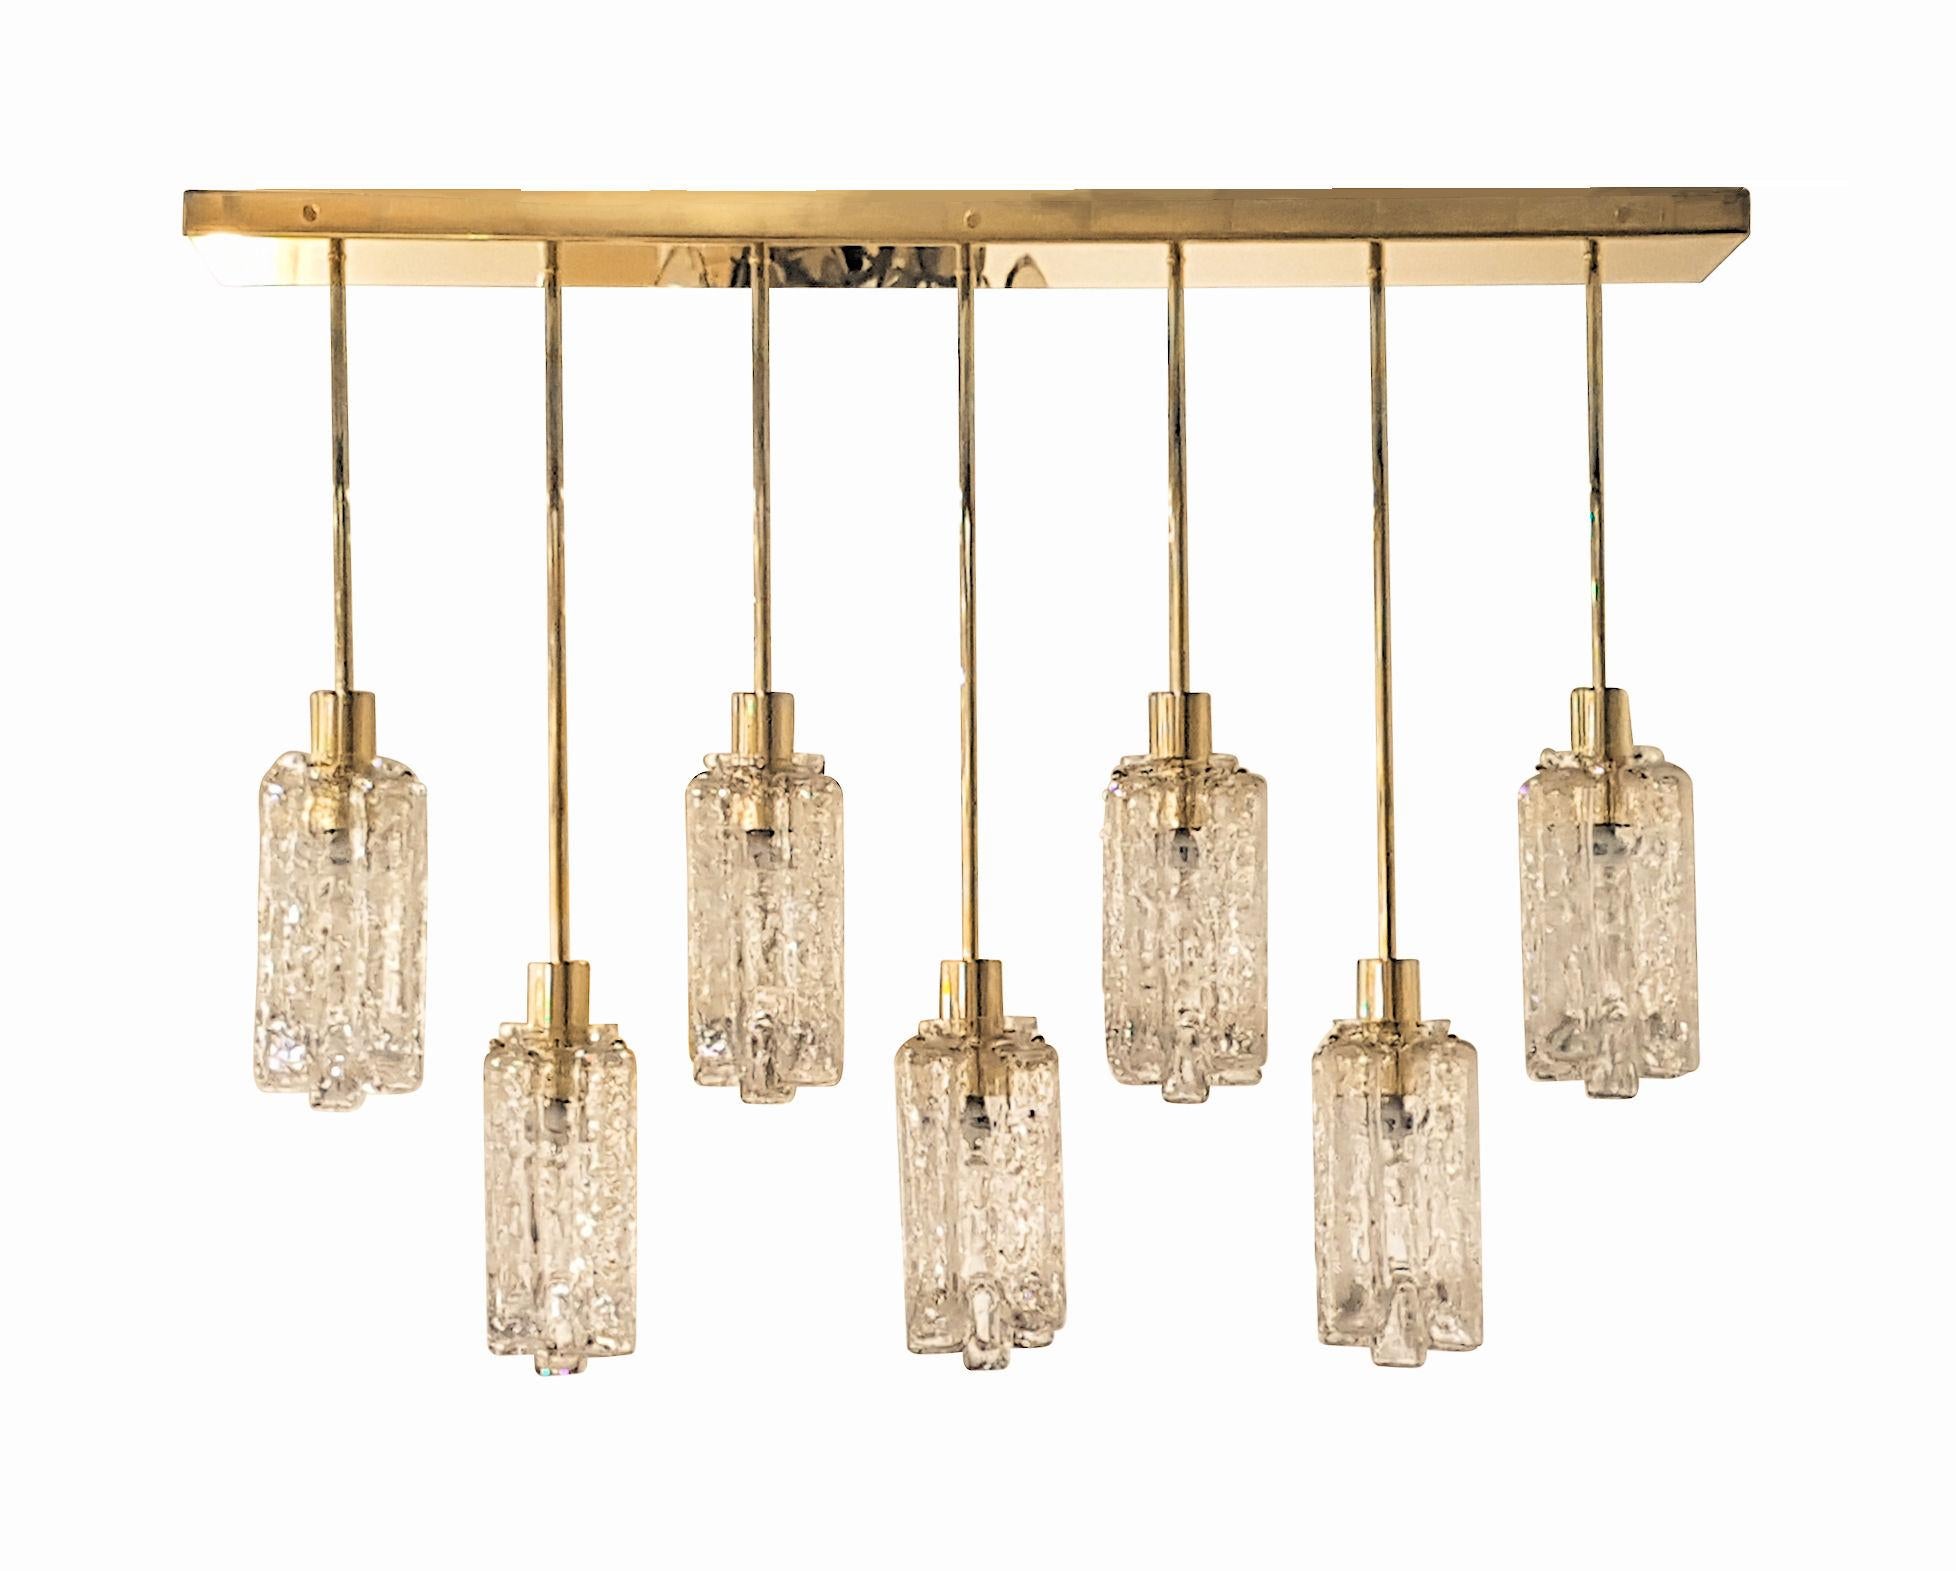 Custom made large rectangular shape Vintage Murano textured clear glass pendants and brass flushmount ceiling light.
Frame made to order: 7 weeks lead time maximum.
Handcrafted by Venetian artisans, using the best quality materials with an